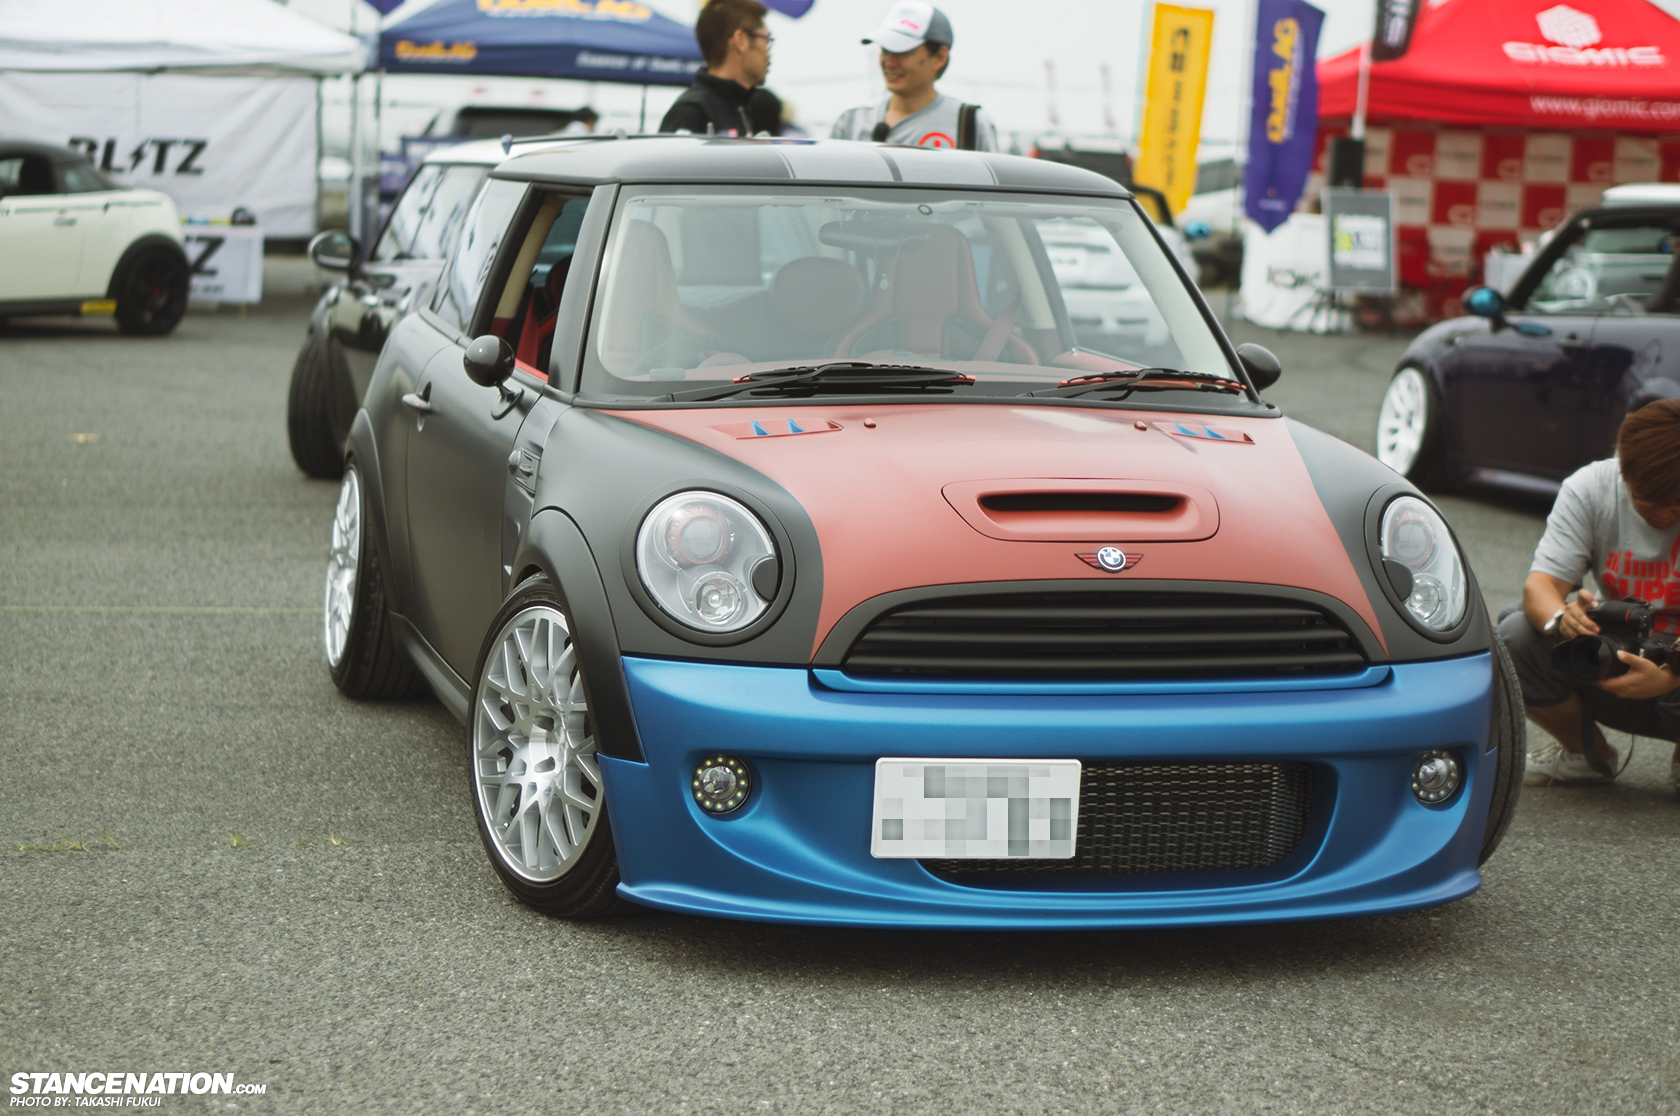 Meanest looking Cooper? Pics please - Page 17 - North American Motoring